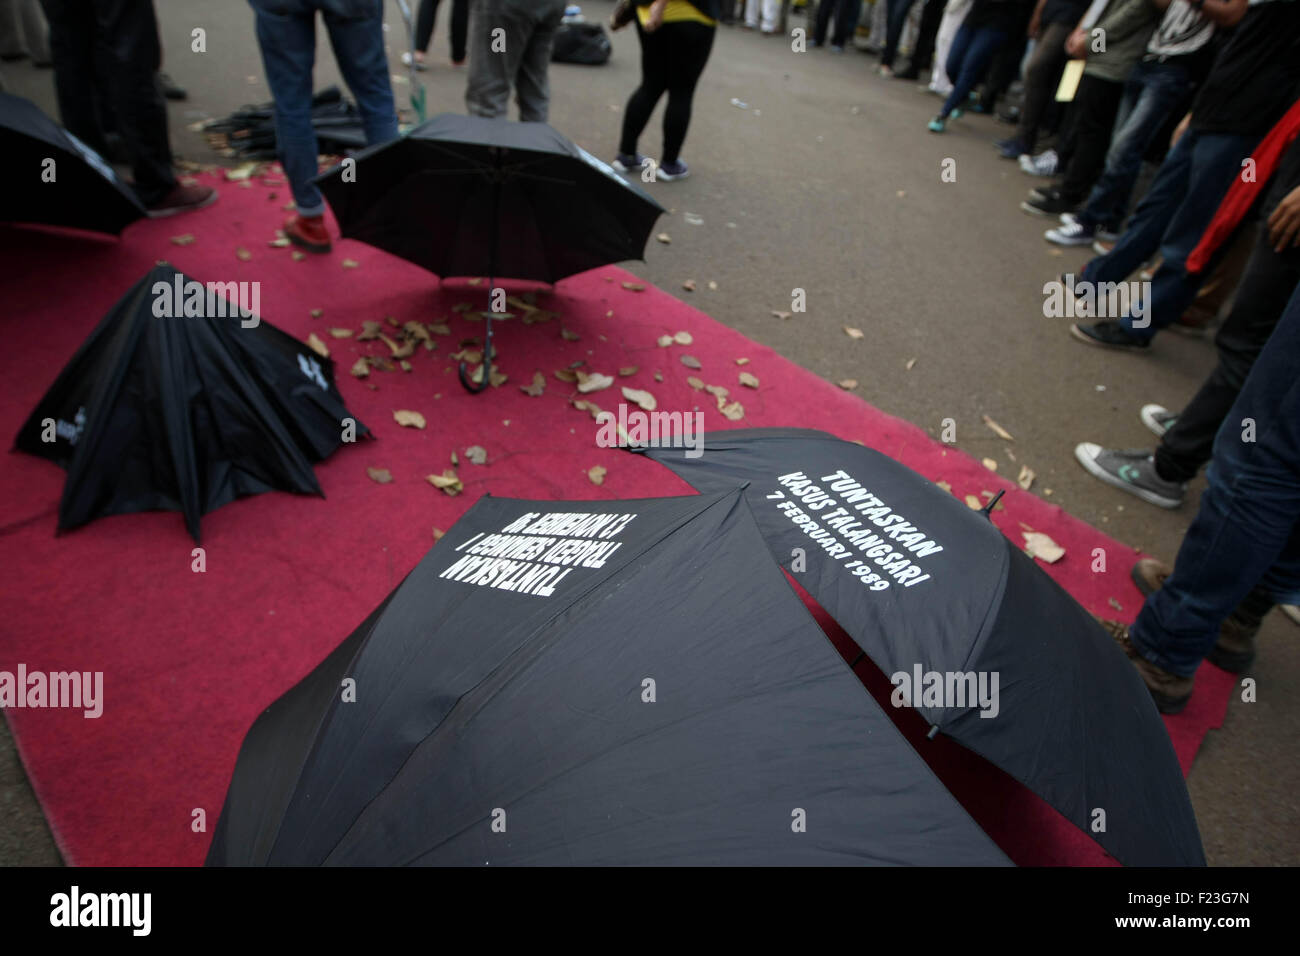 Central Jakarta, Jakarta, Indonesia. 14th Feb, 2013. Human rights activists during the gathered for the 411th time in front of the Presidential Palace in Jakarta for the weekly Kamisan (Thursdays). Kamisan (with black umbrella is symbol) was initiated in January 2007 by families of victims of human rights violations, and is supported by human rights organisations such as The Commission for the Disappeared and Victims of Violence (KontraS). The protest brings together individuals concerned with various human rights cases: from those committed during Soeharto's New Order, such as the 1965/196 Stock Photo